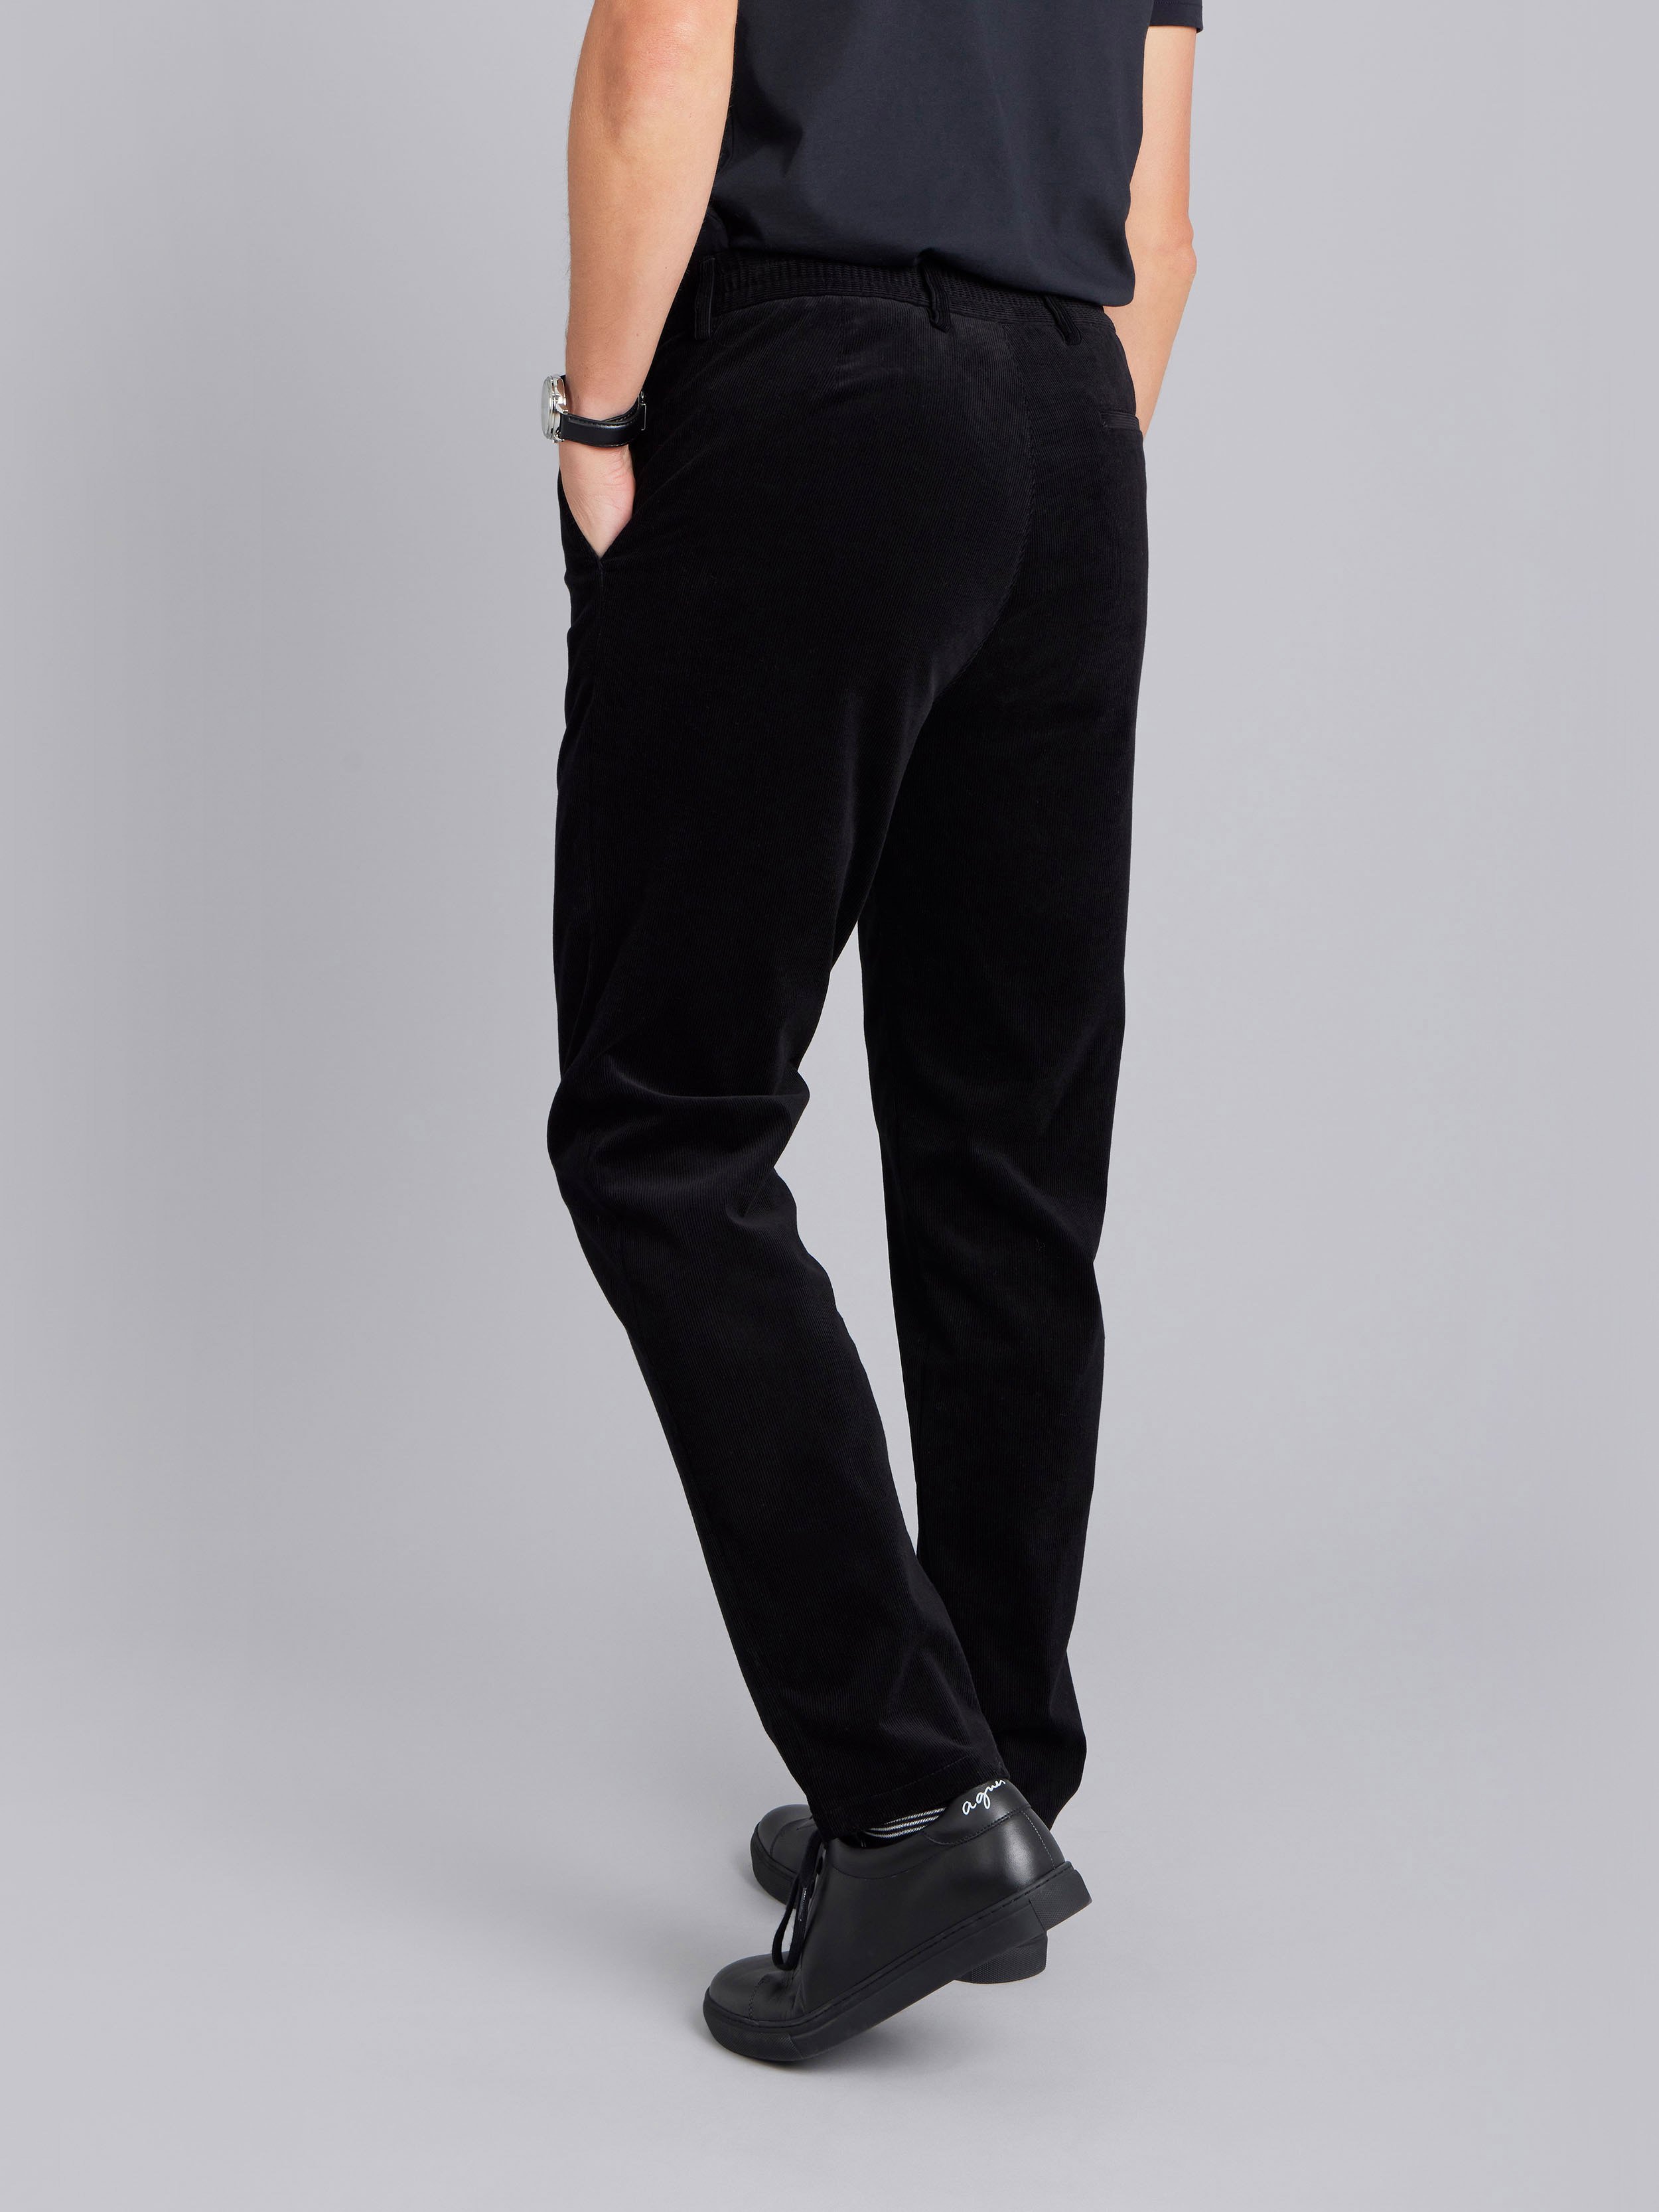 Relaxed Fit Belted corduroy trousers - Black - Men | H&M IN